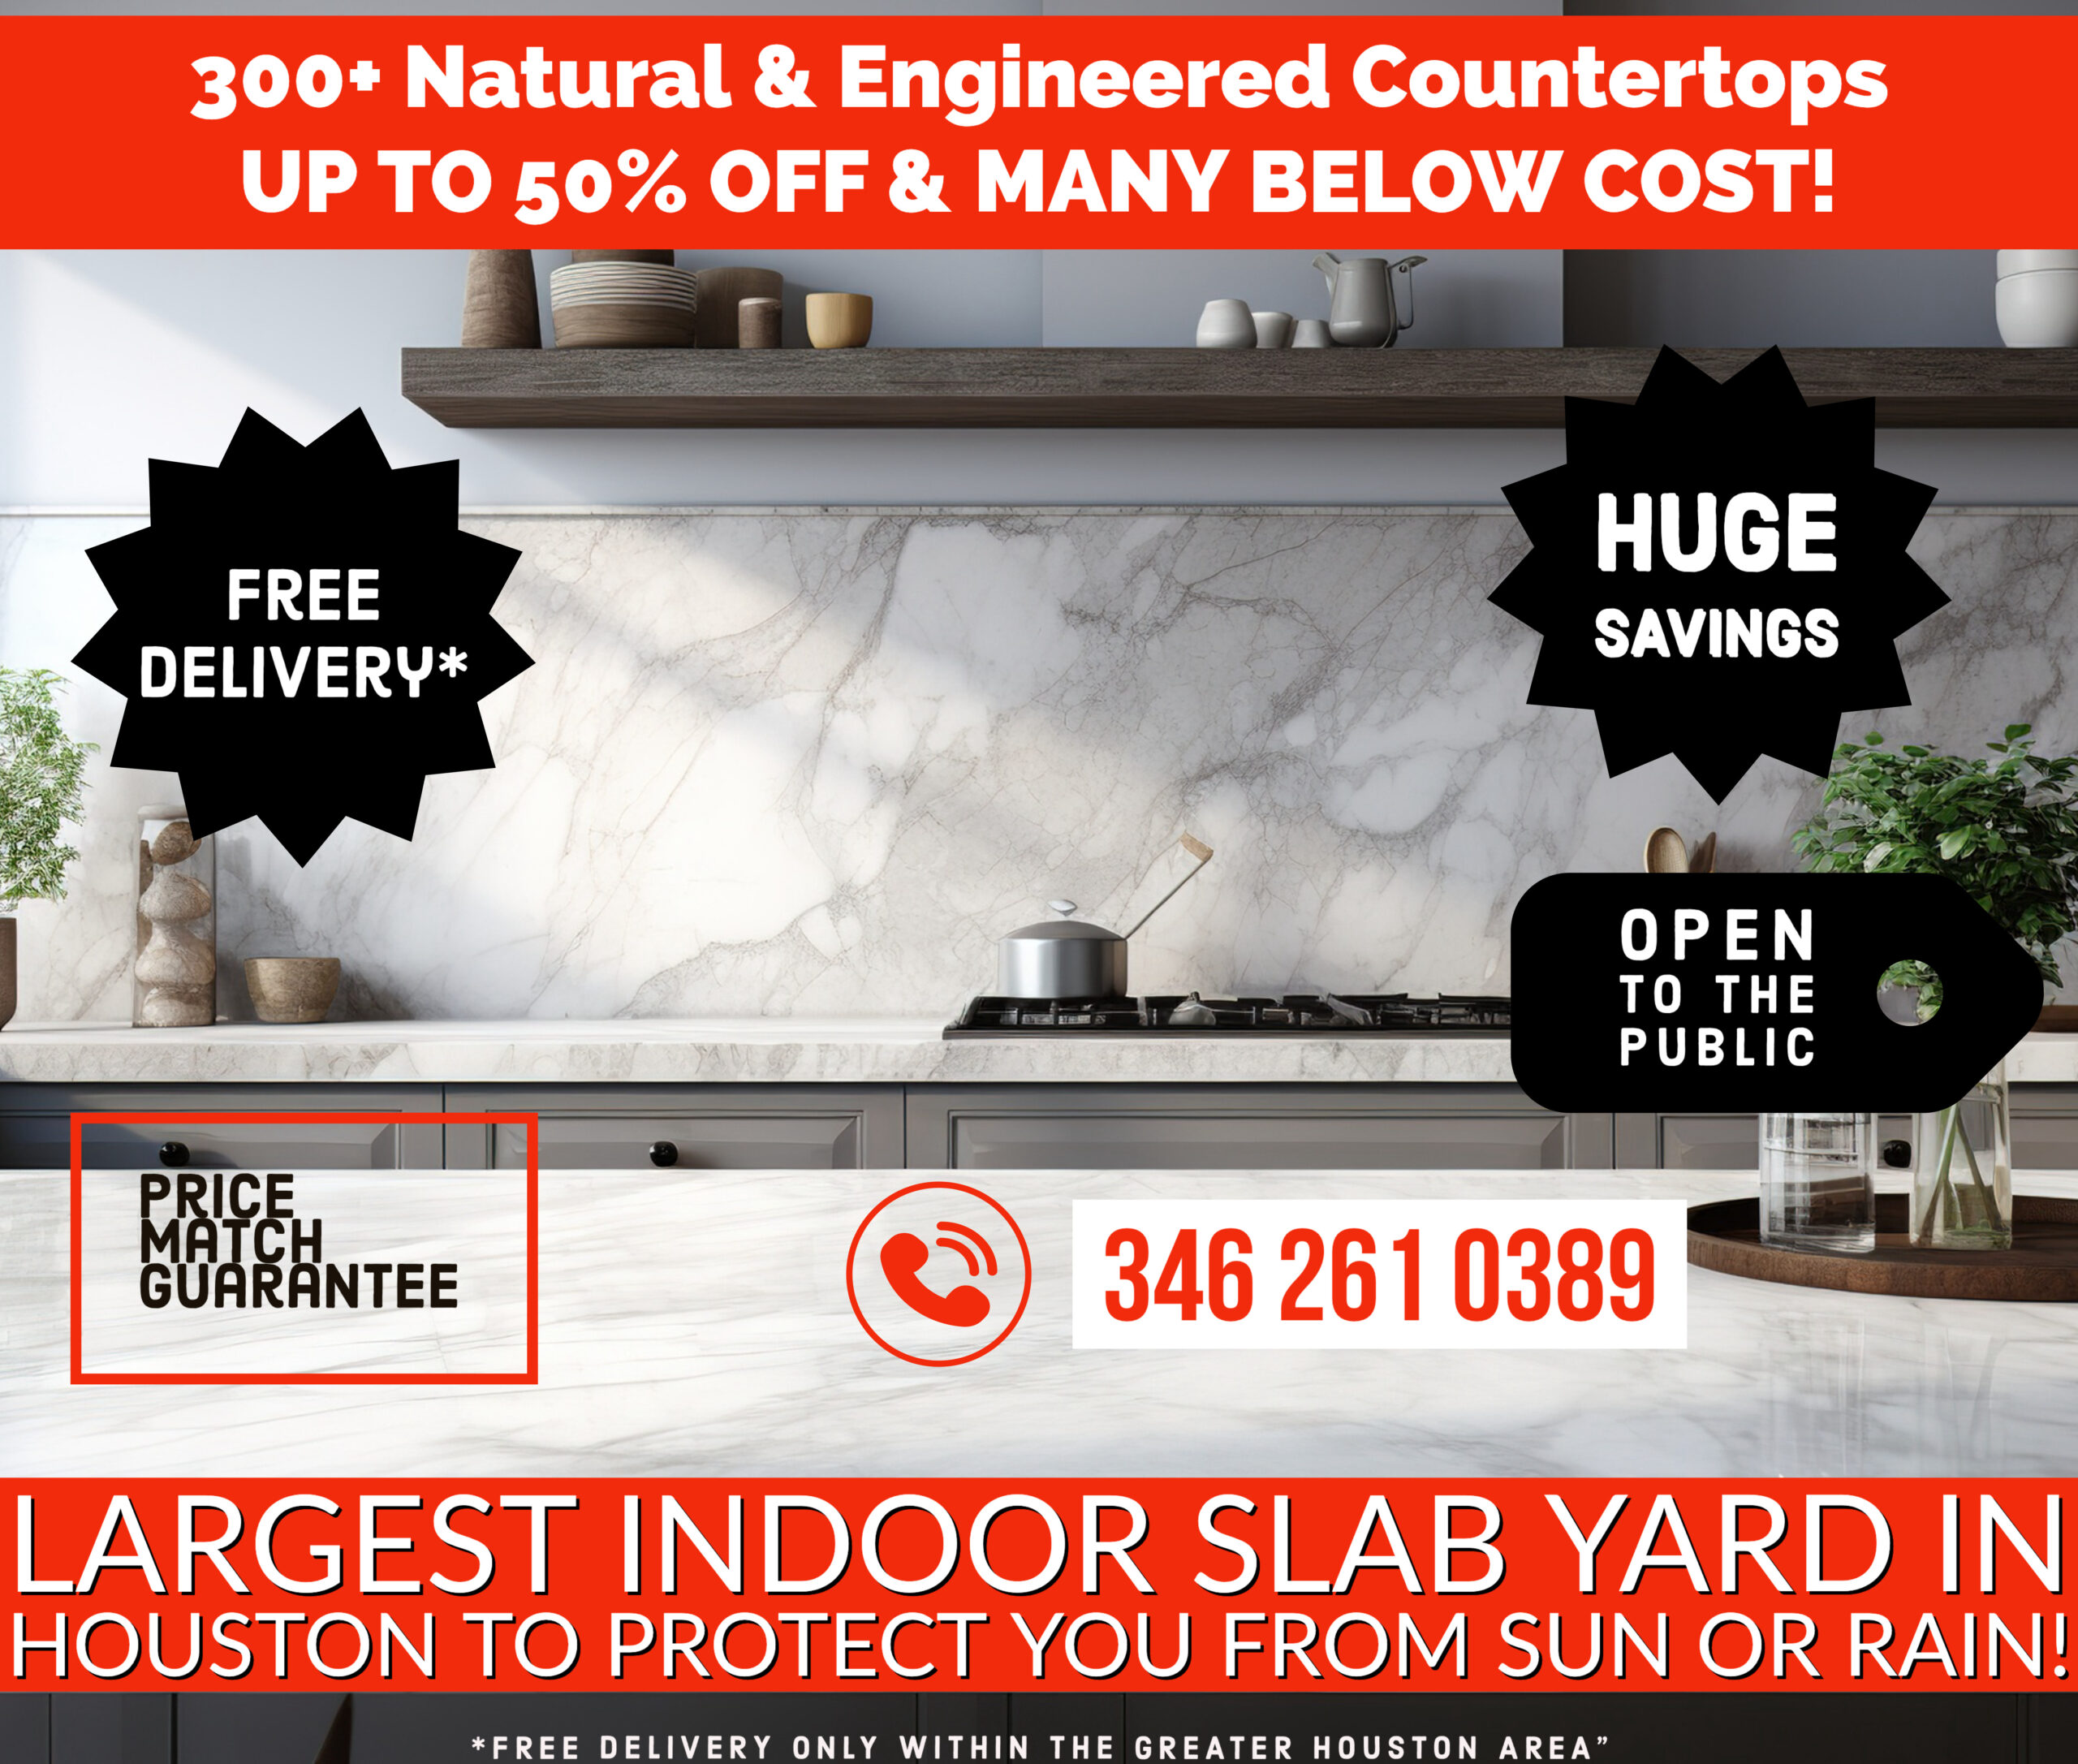 Natural And Engineered Stone Countertops Sale At Maestro Surfaces In Houston, TX. Up To 50% Off With Free Delivery And Price Match Guarantee